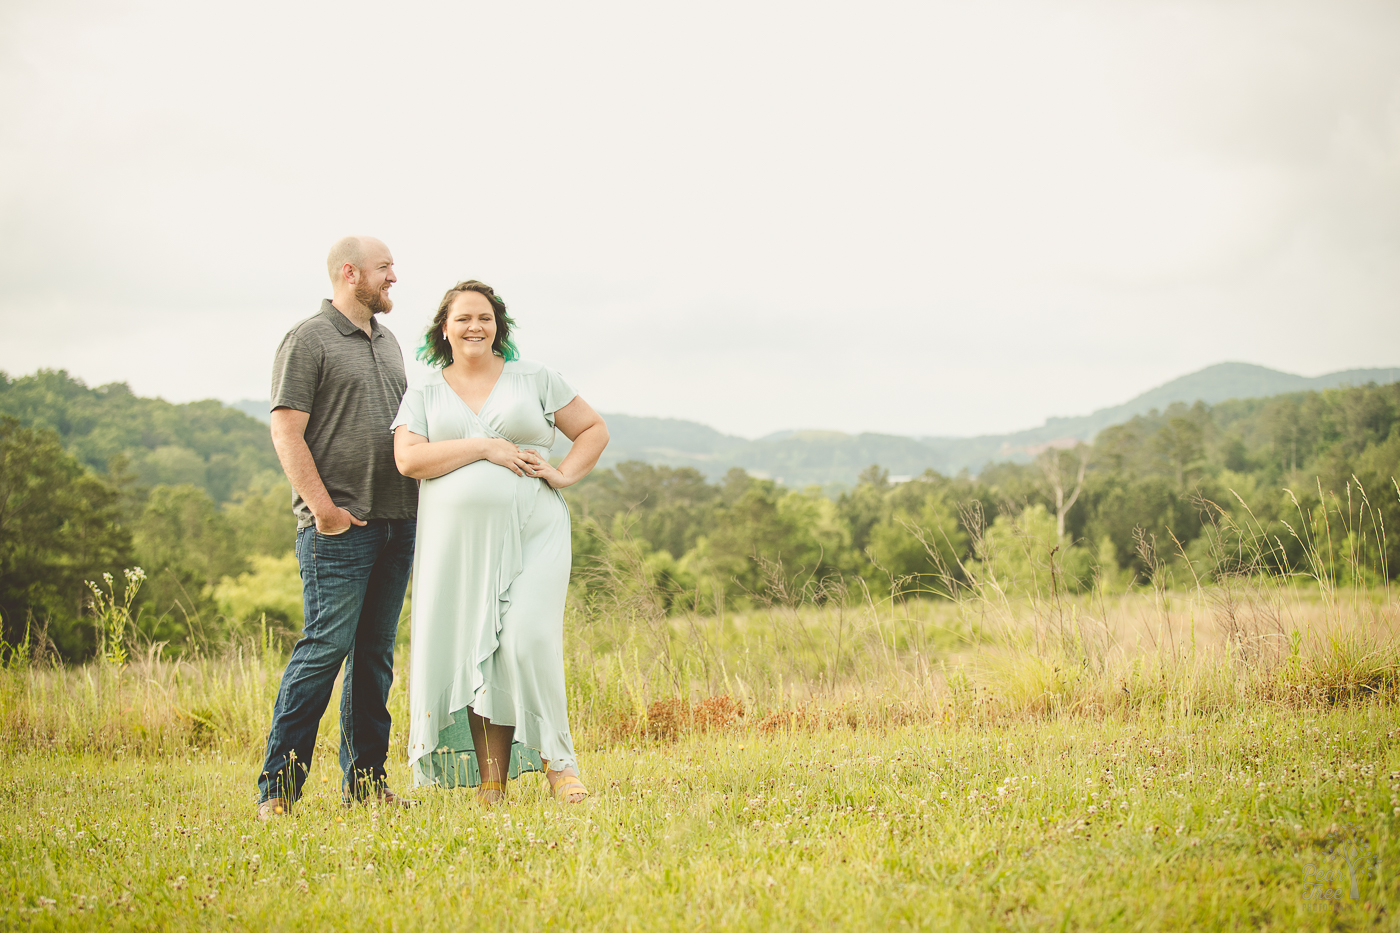 Beautiful pregnant woman standing in a long dress and hands over her big belly for maternity photographs. Her husband is standing next to her looking into the distance with his hands in his pockets.